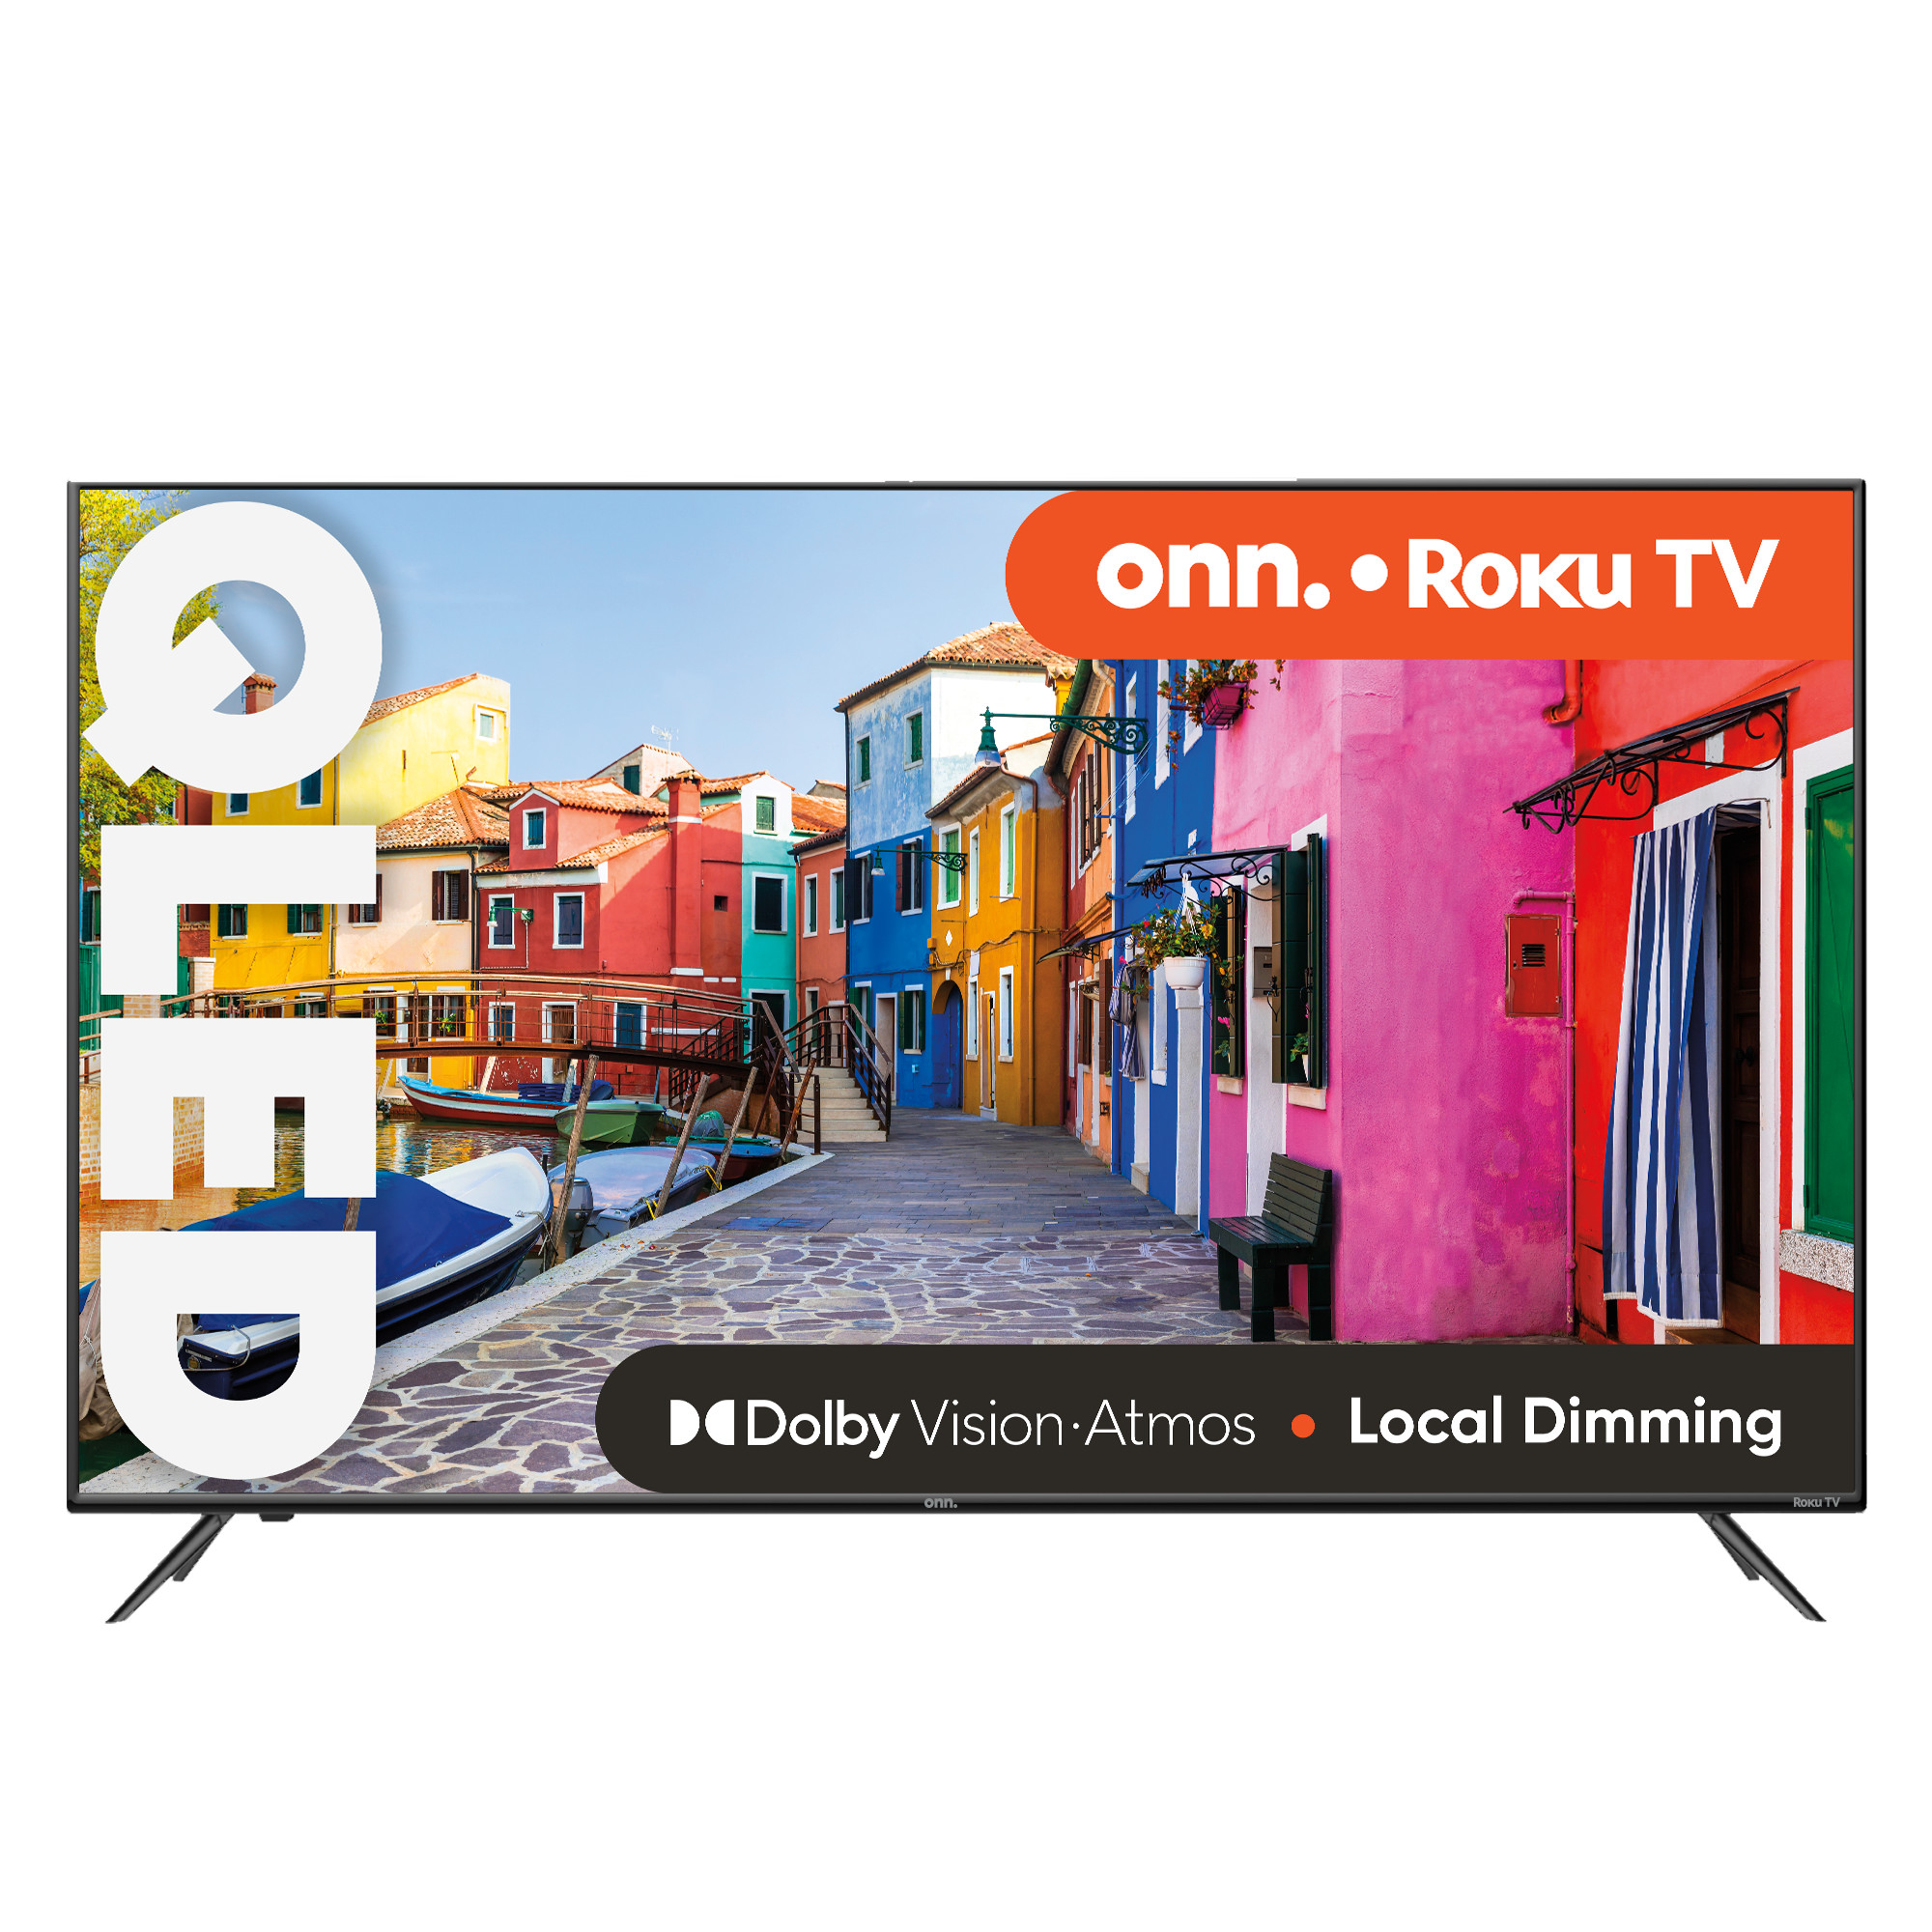 onn. 55” QLED 4K UHD (2160p) Roku Smart TV with Dolby Atmos, Dolby Vision, Local Dimming, 120hz Effective Refresh Rate, and HDR (100071701) - image 1 of 17